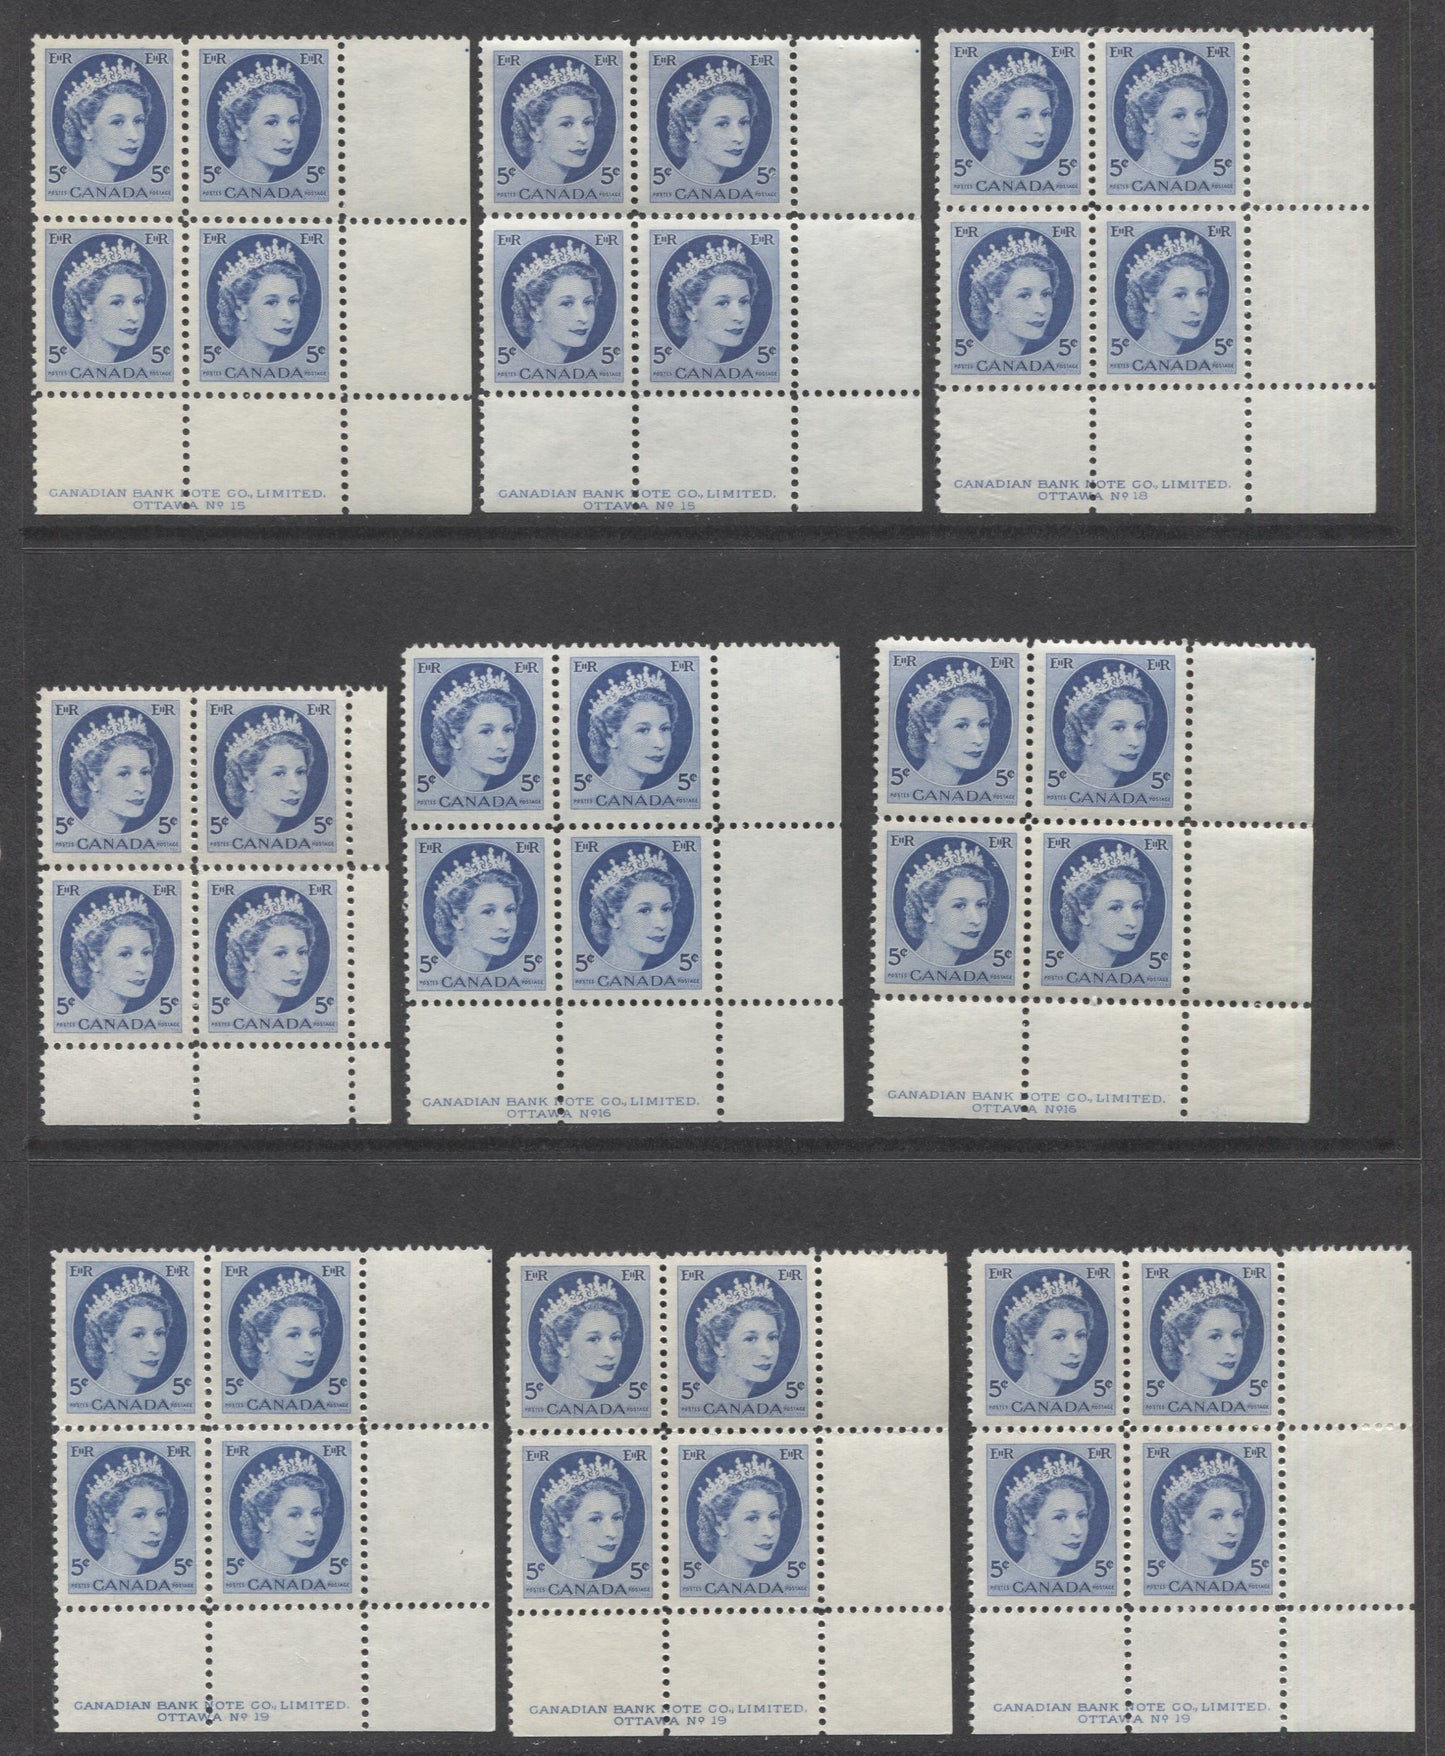 Lot 95 Canada #341i 5c Bright Blue Queen Elizabeth II, 1954 Wilding Definitives, 13 VFNH/LH LR Plates 15-19 & Blank Blocks Of 4 With Different NF Papers